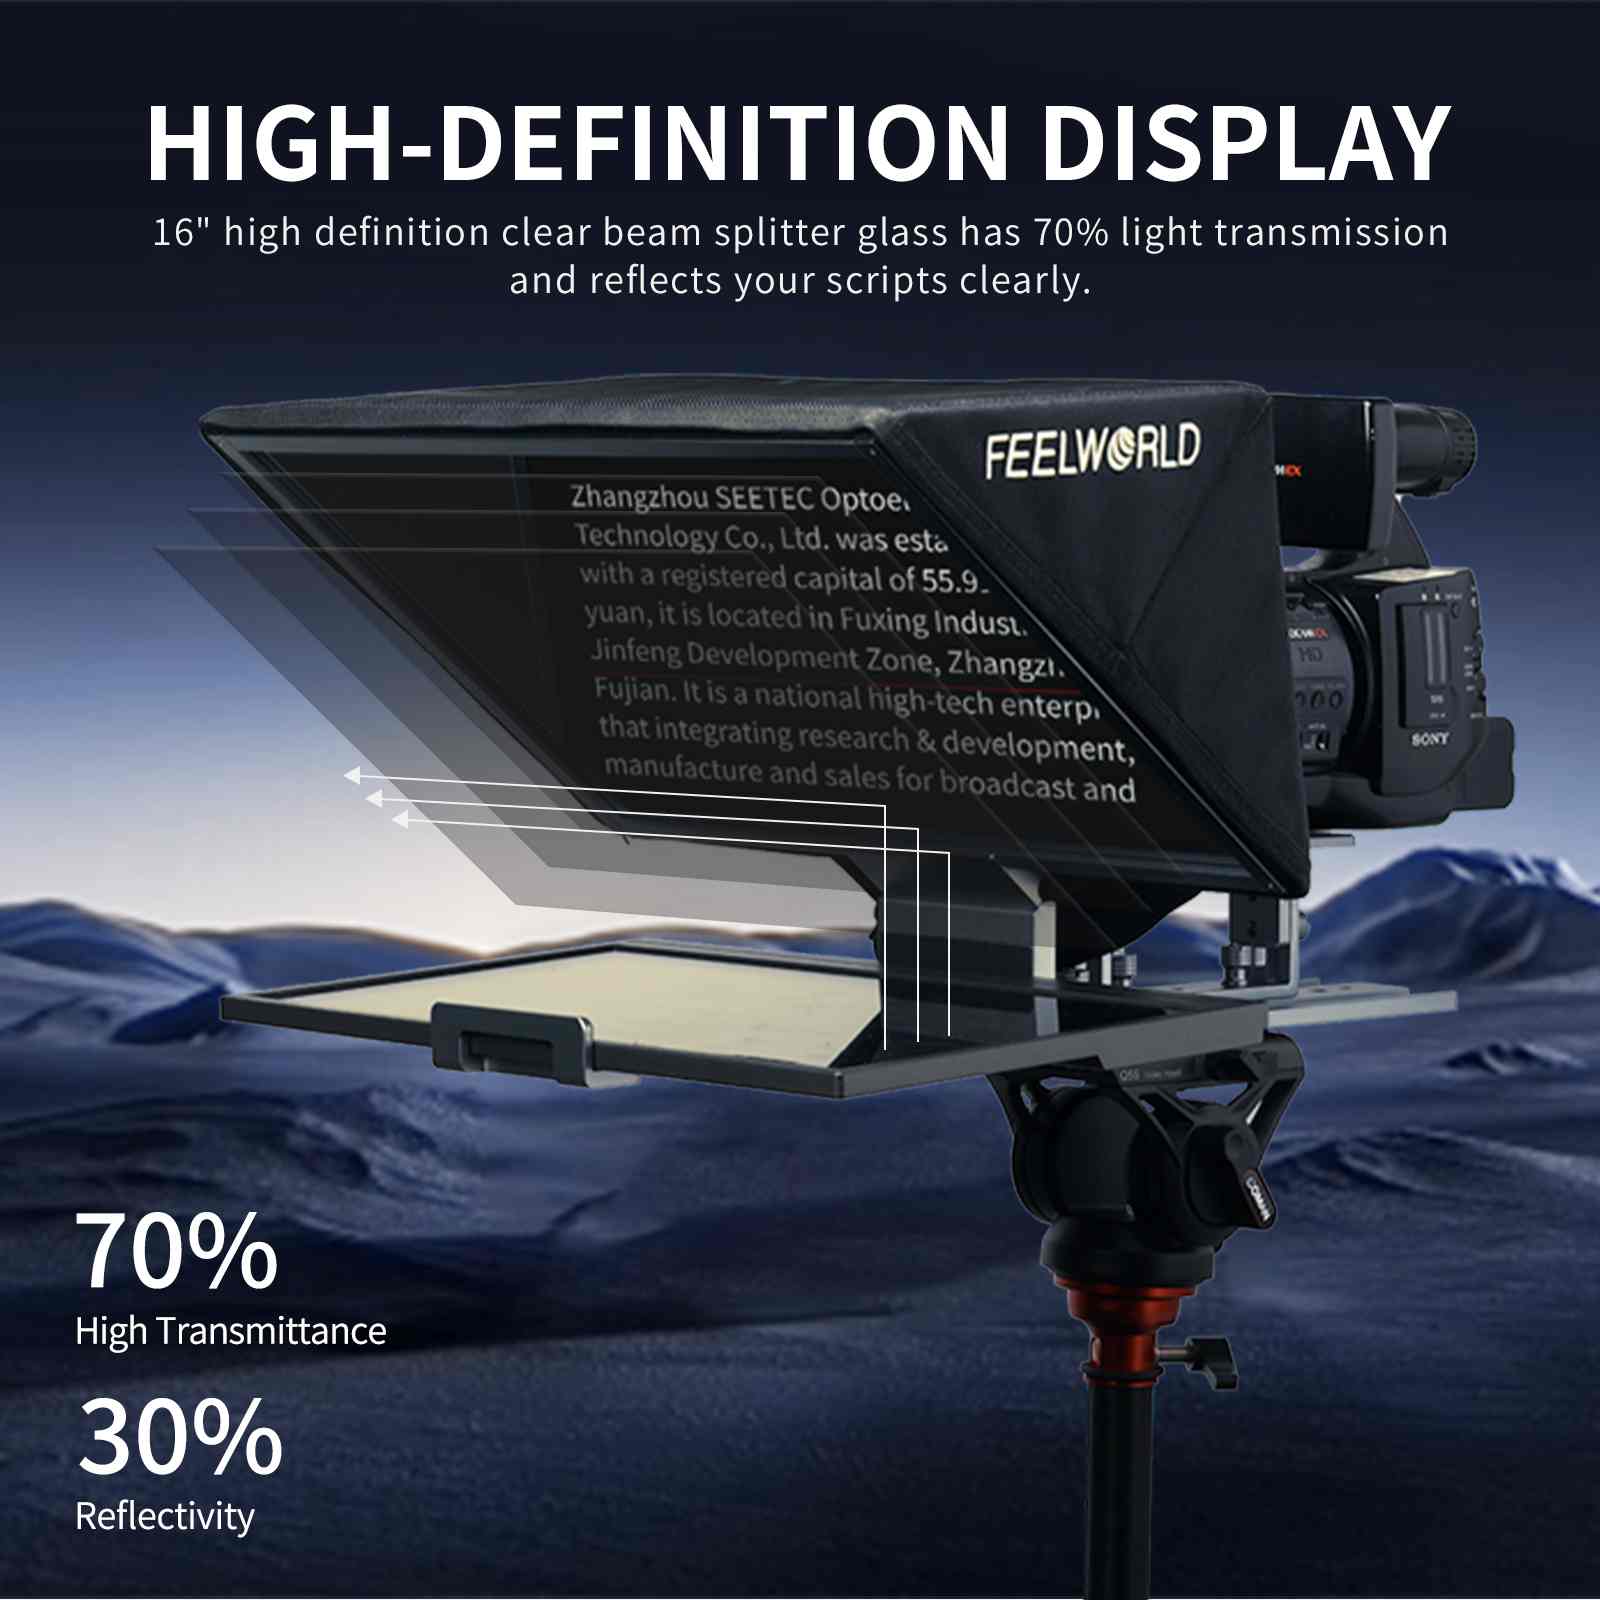 FEELWORLD TP16 16-inch Folding Teleprompter supports up to 16